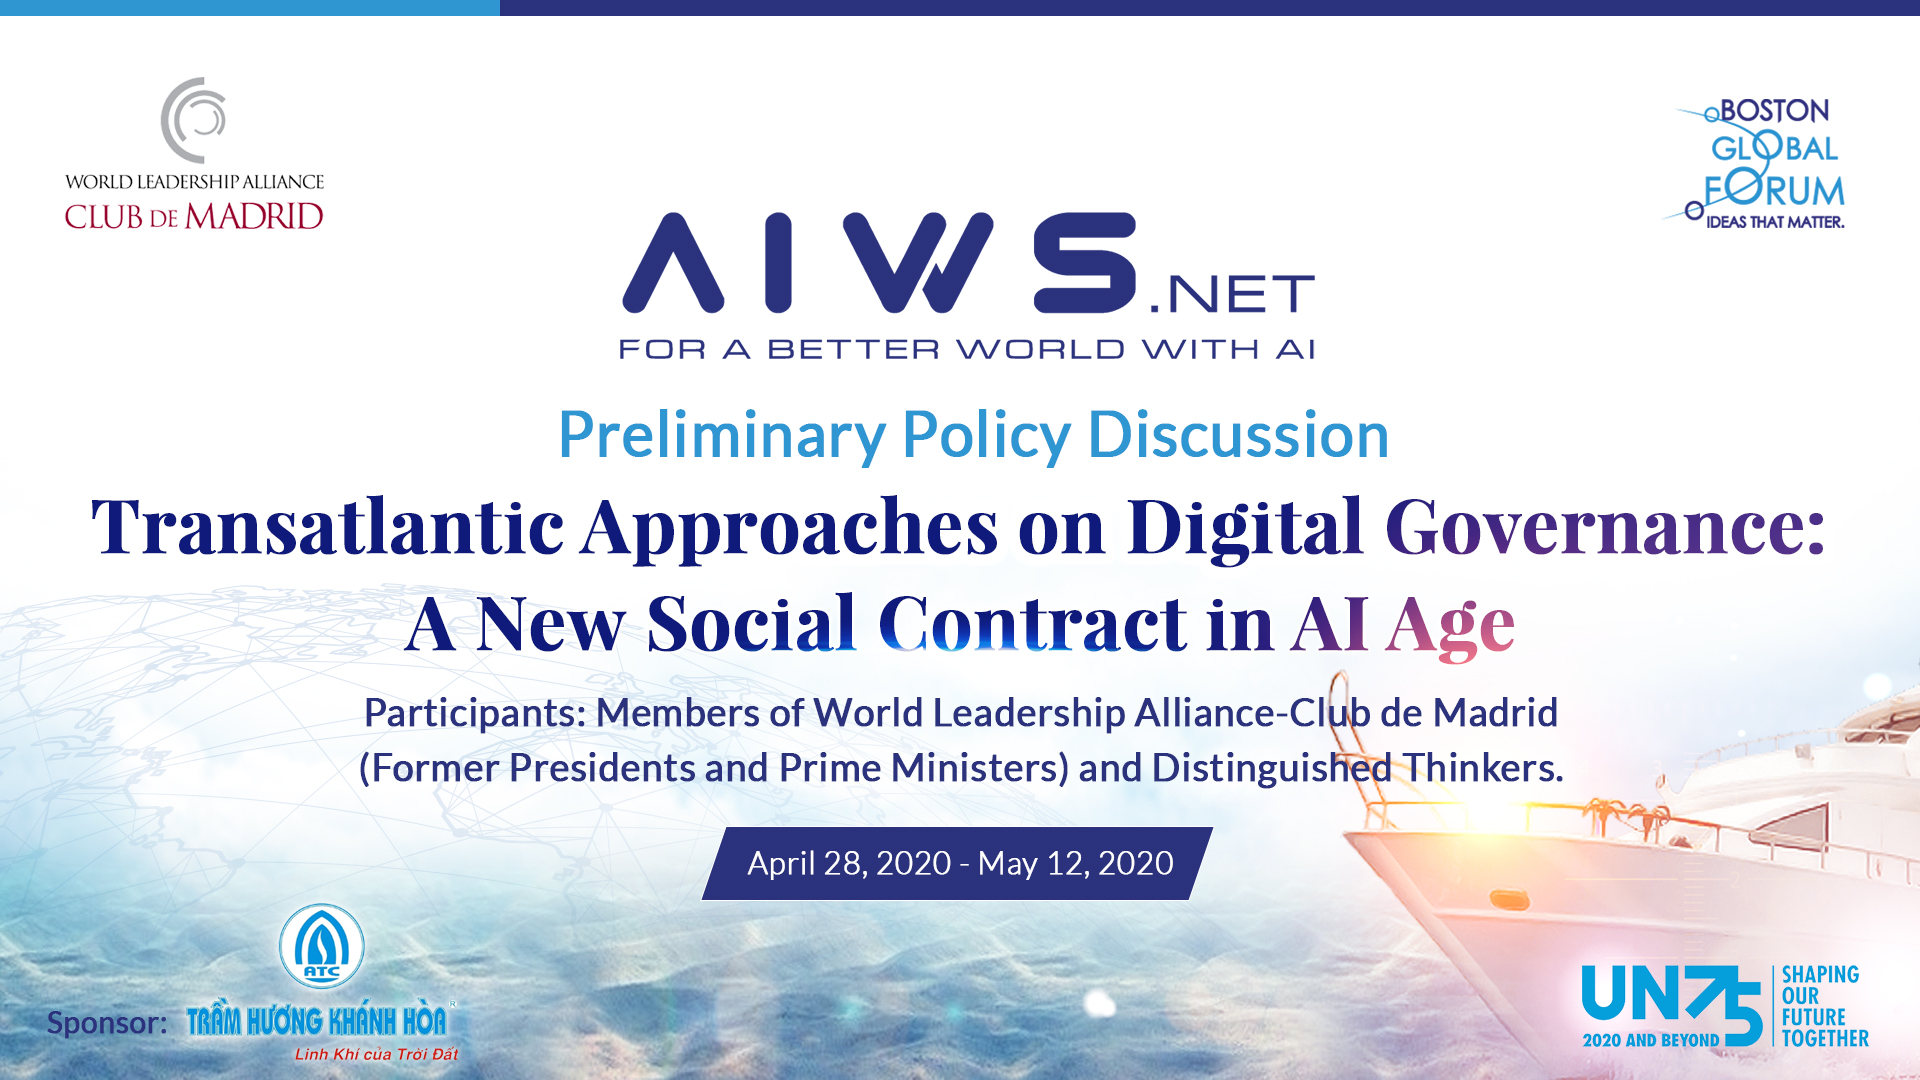 AIWS.net hosts the policy discussion on Transatlantic Approaches on Digital Governance: A New Social Contract in AI Age